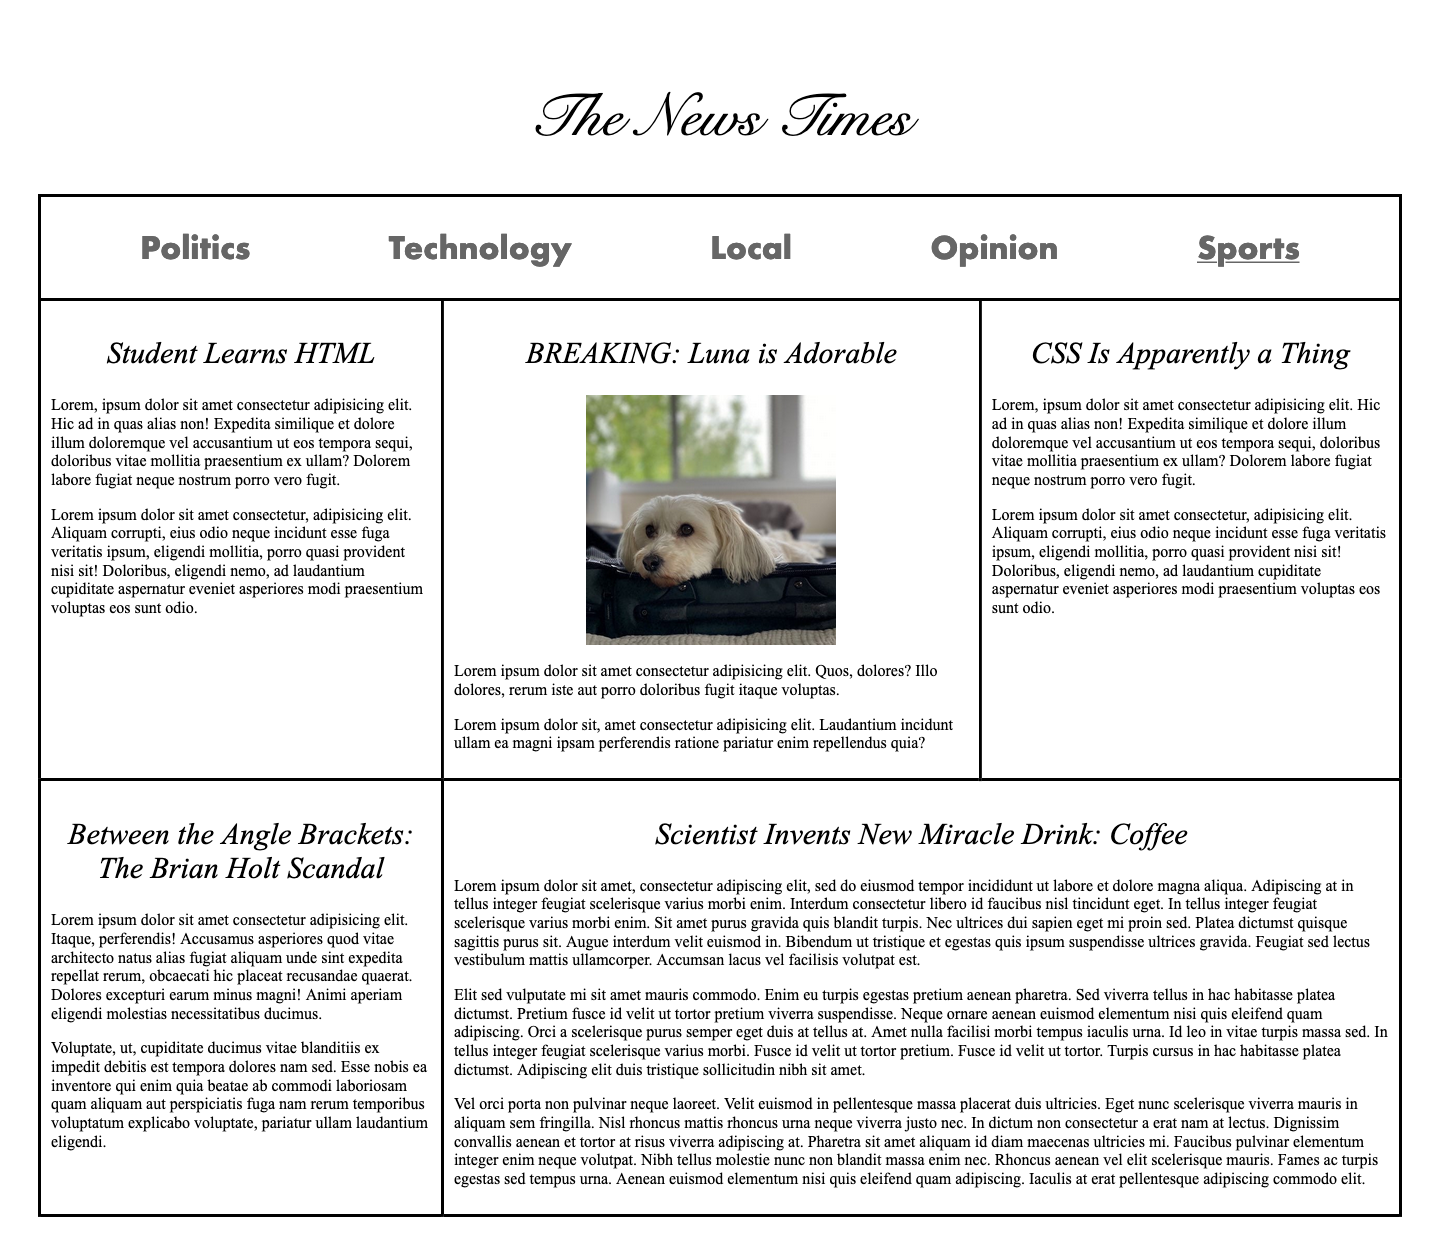 The News Times design